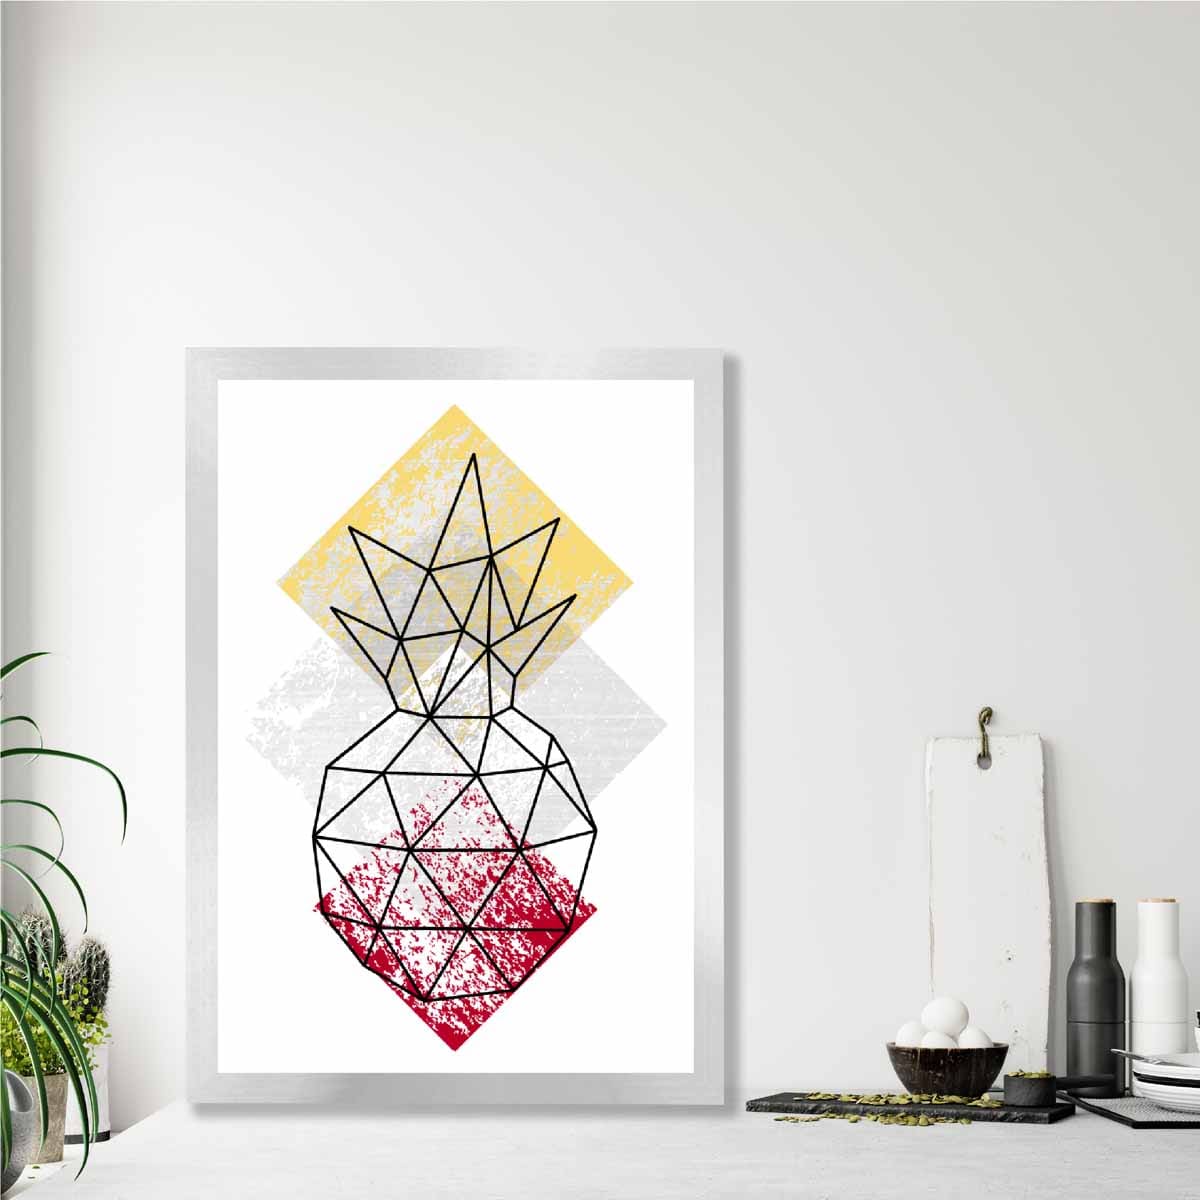 Geometric Fruit Line art Poster of Pineapple Textured Yellow Grey Red